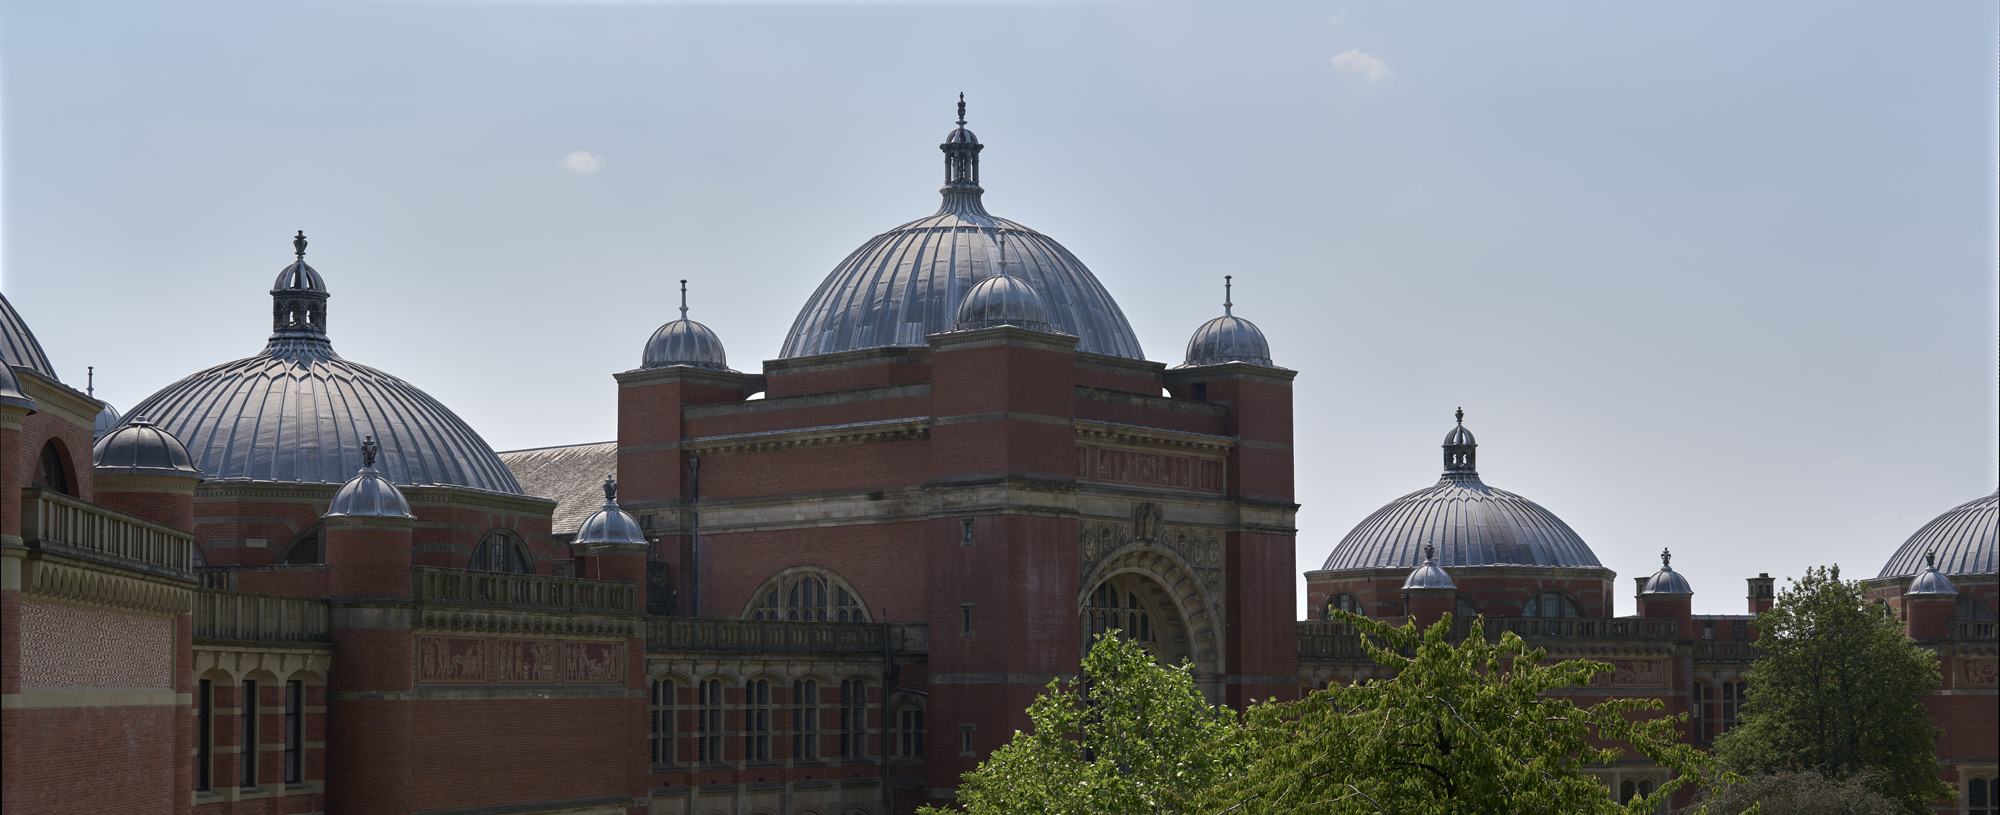 The domes of the Aston Webb building in Chancellor's Court, University of Birmingham